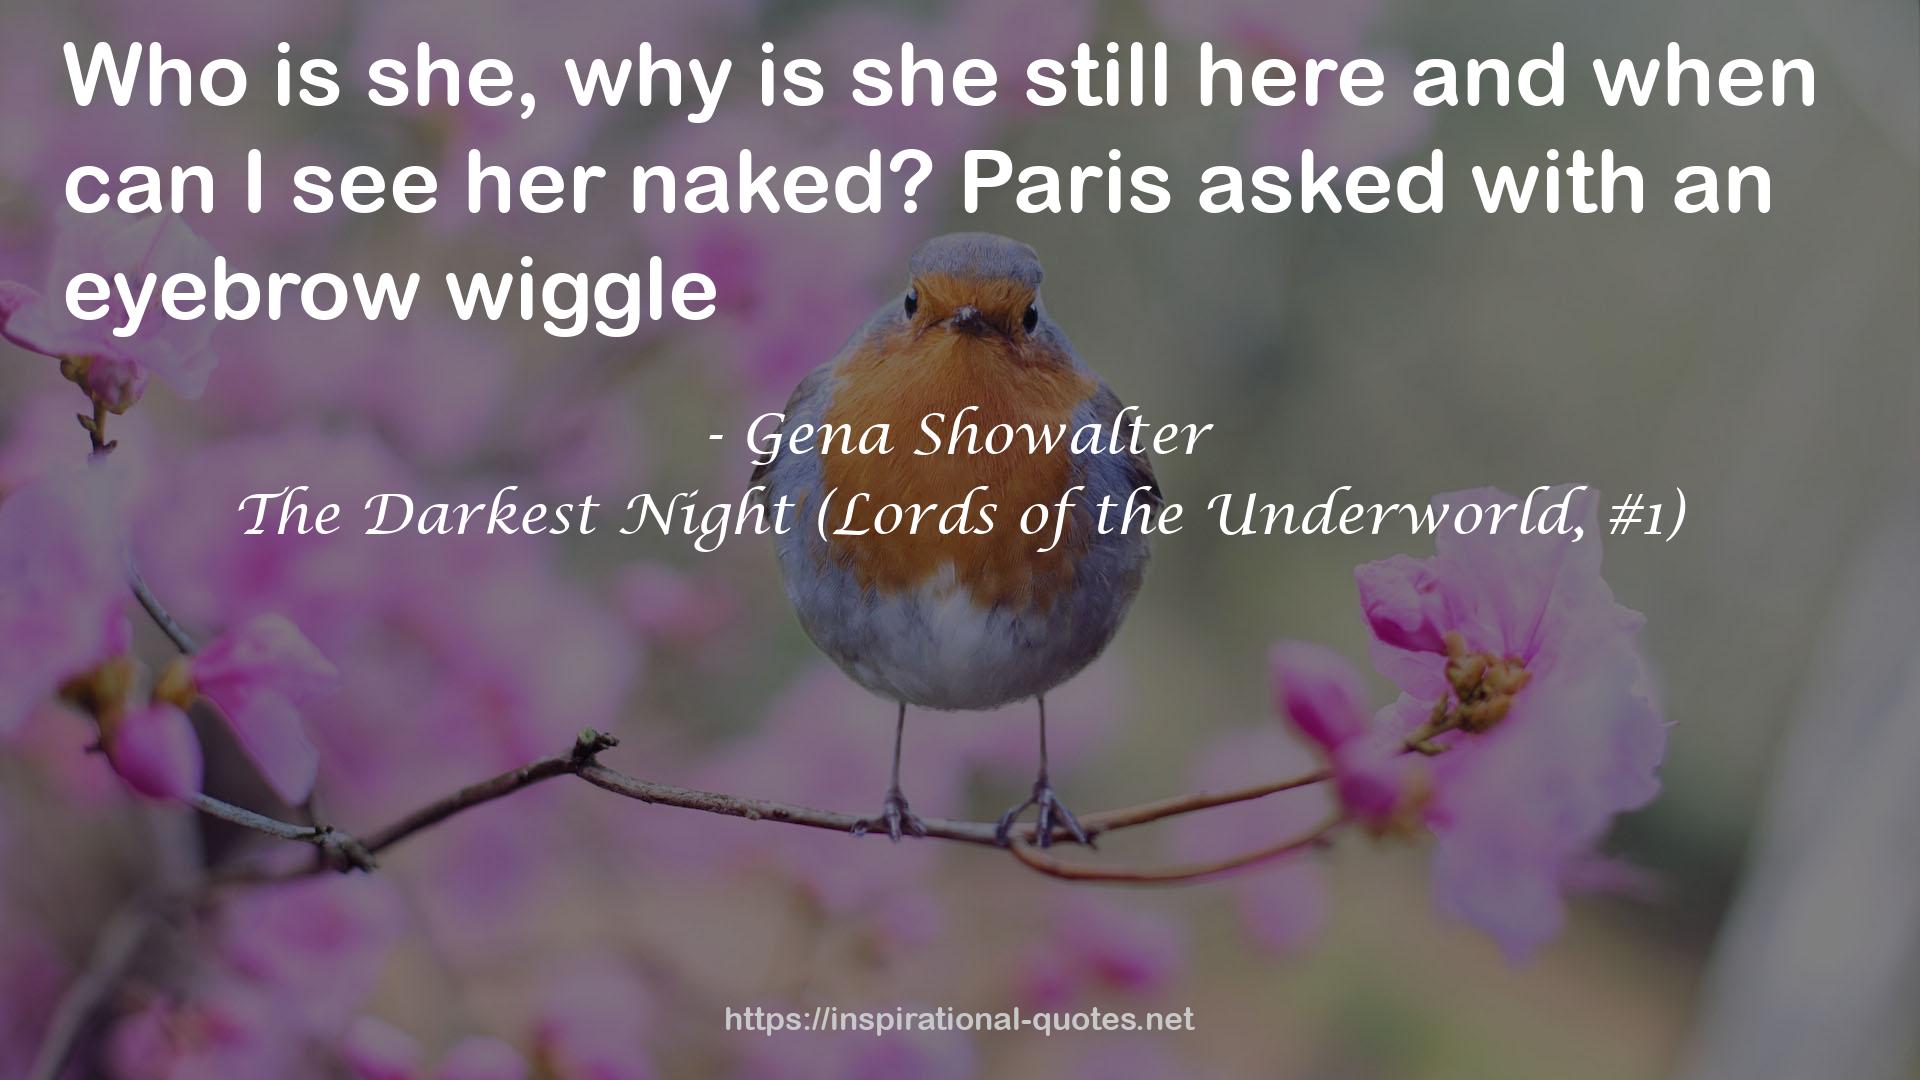 The Darkest Night (Lords of the Underworld, #1) QUOTES